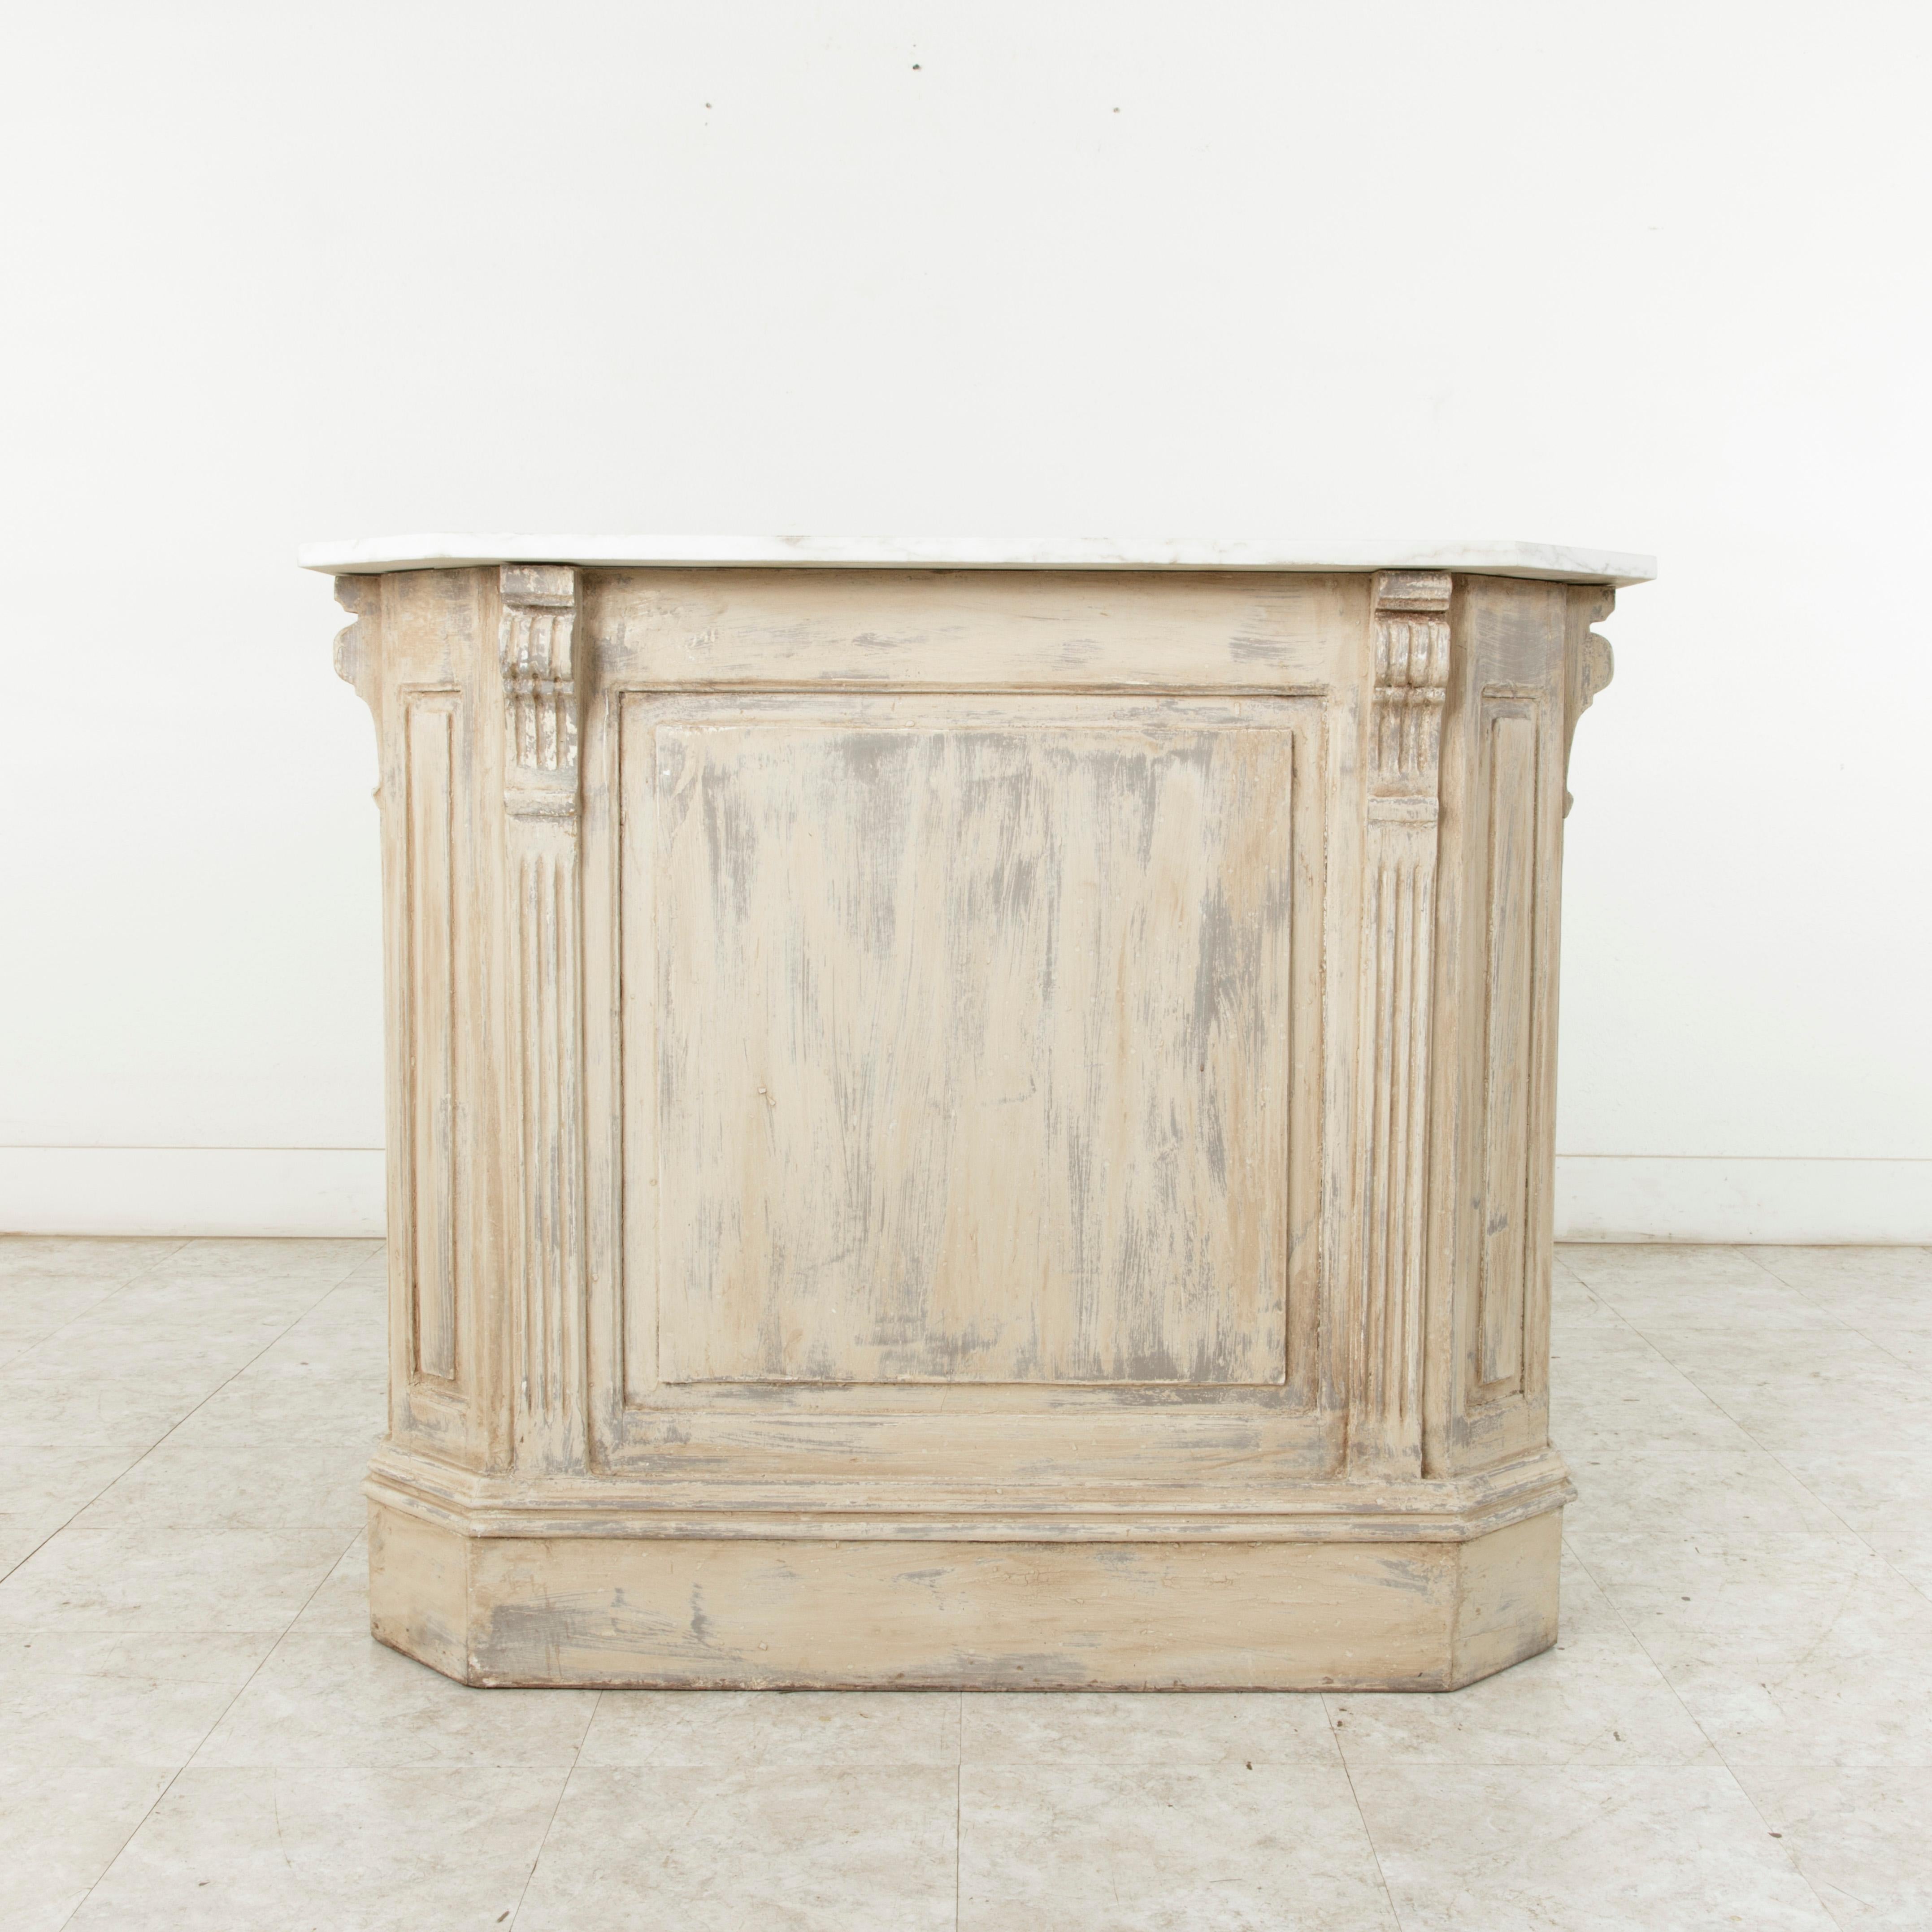 Belgian Painted Dry Bar or Counter with Veined White Marble Top, circa 1900